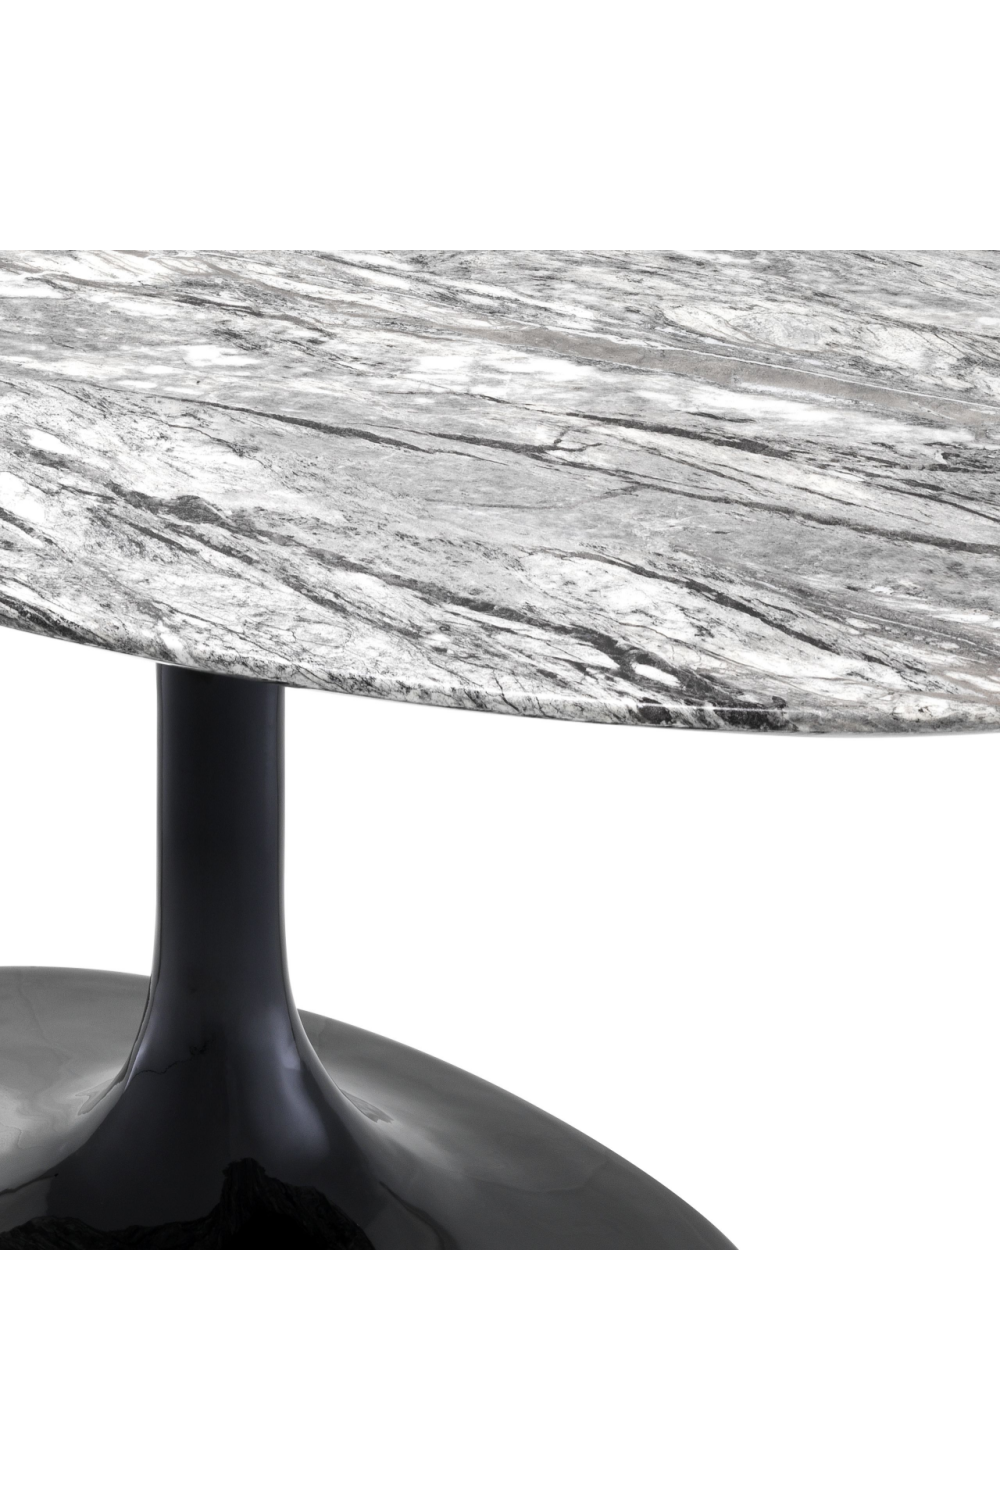 Gray Marble Oval Dining Table | Eichholtz Solo | OROA